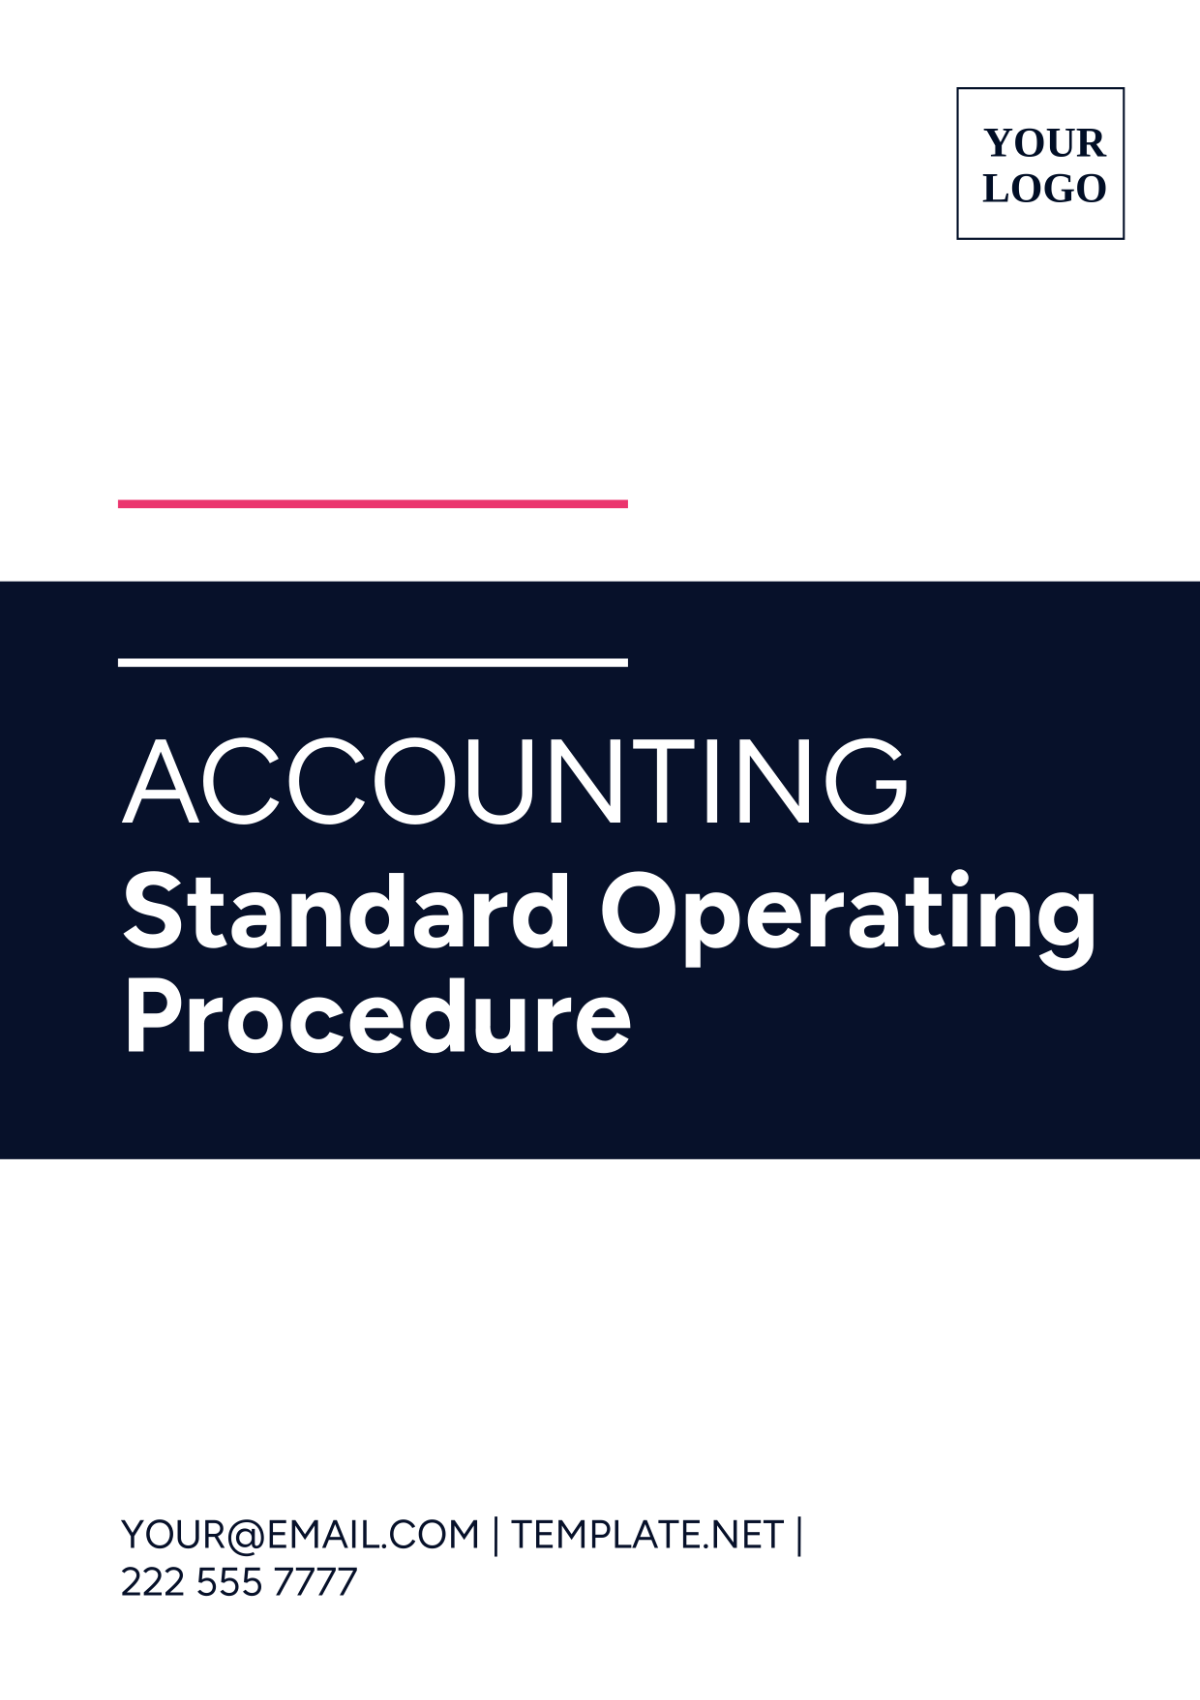 Accounting SOP Template